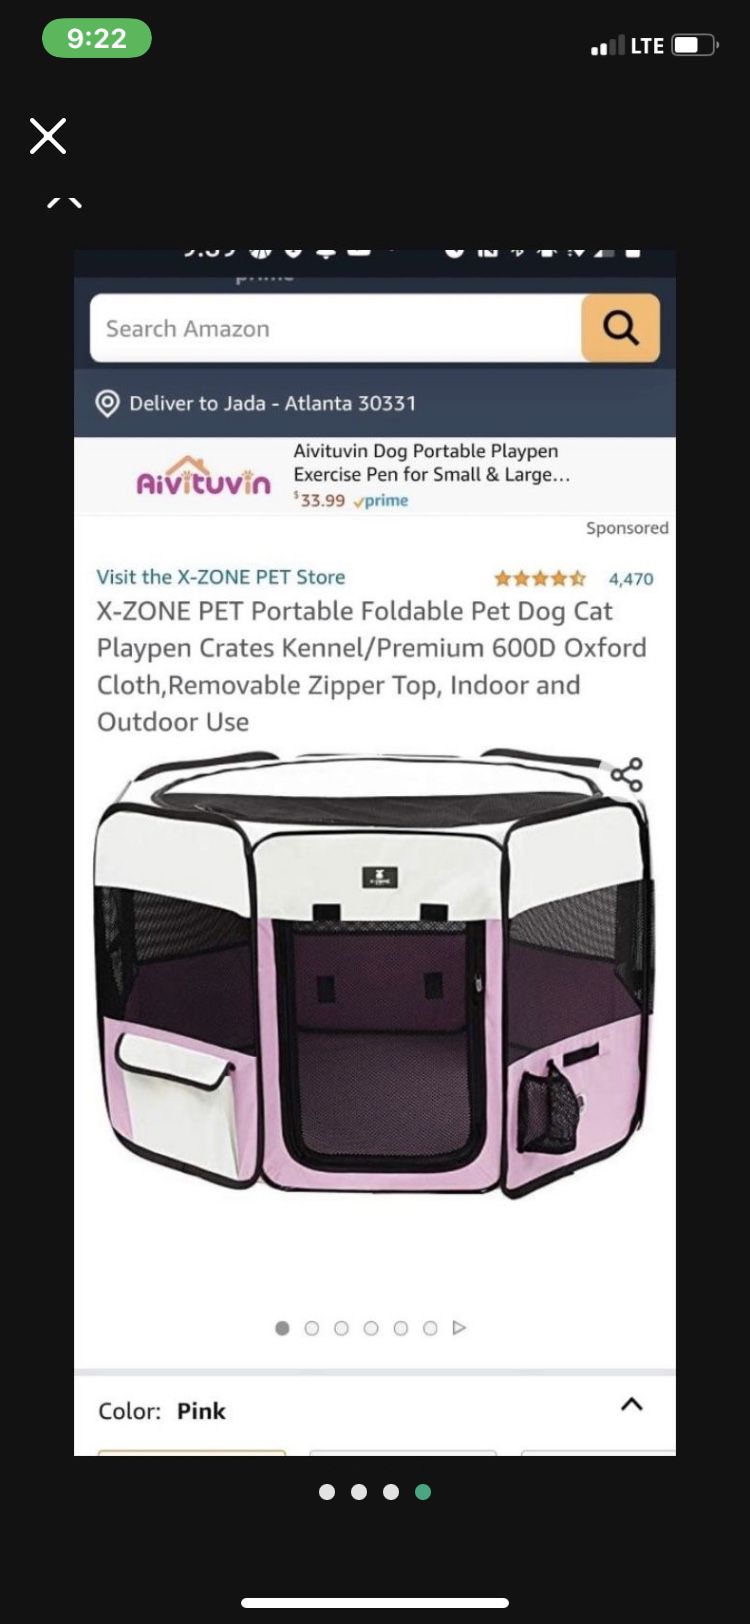 X-ZONE PET Portable Foldable Pet Dog Cat Playpen Crates Kennel/Premium 600D Oxford Cloth,Removable Zipper Top, Indoor and Outdoor Use 